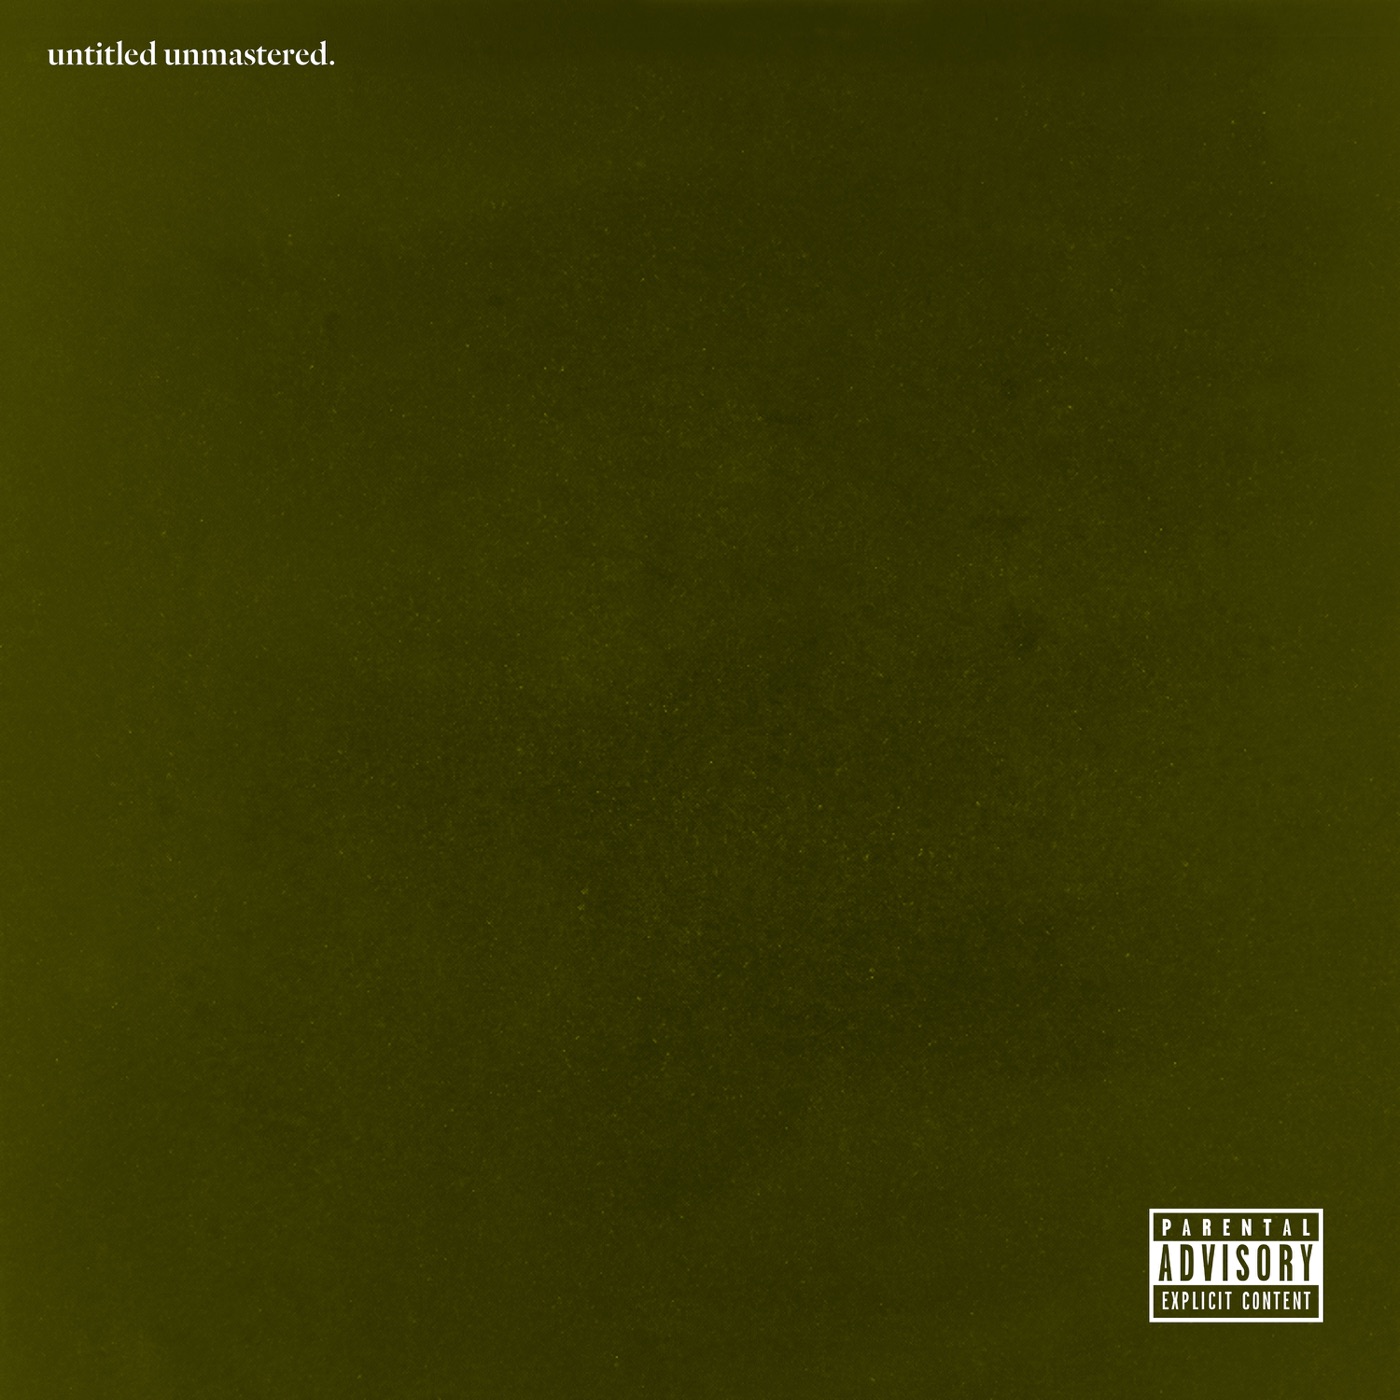 untitled unmastered. by Kendrick Lamar